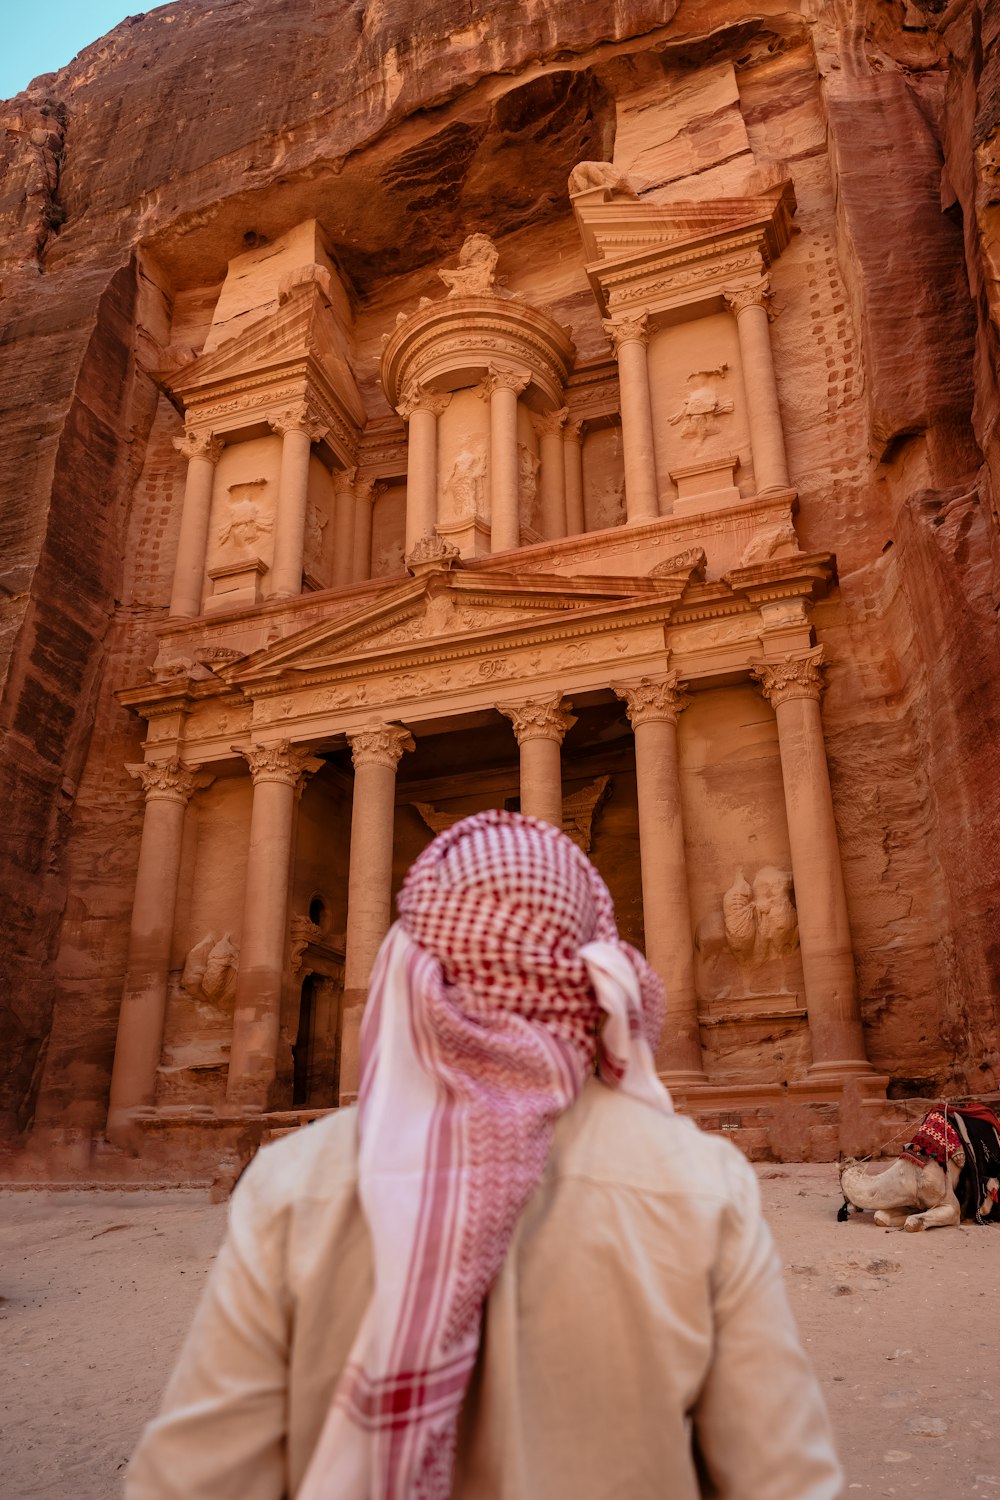 a person standing in front of a building in the desert